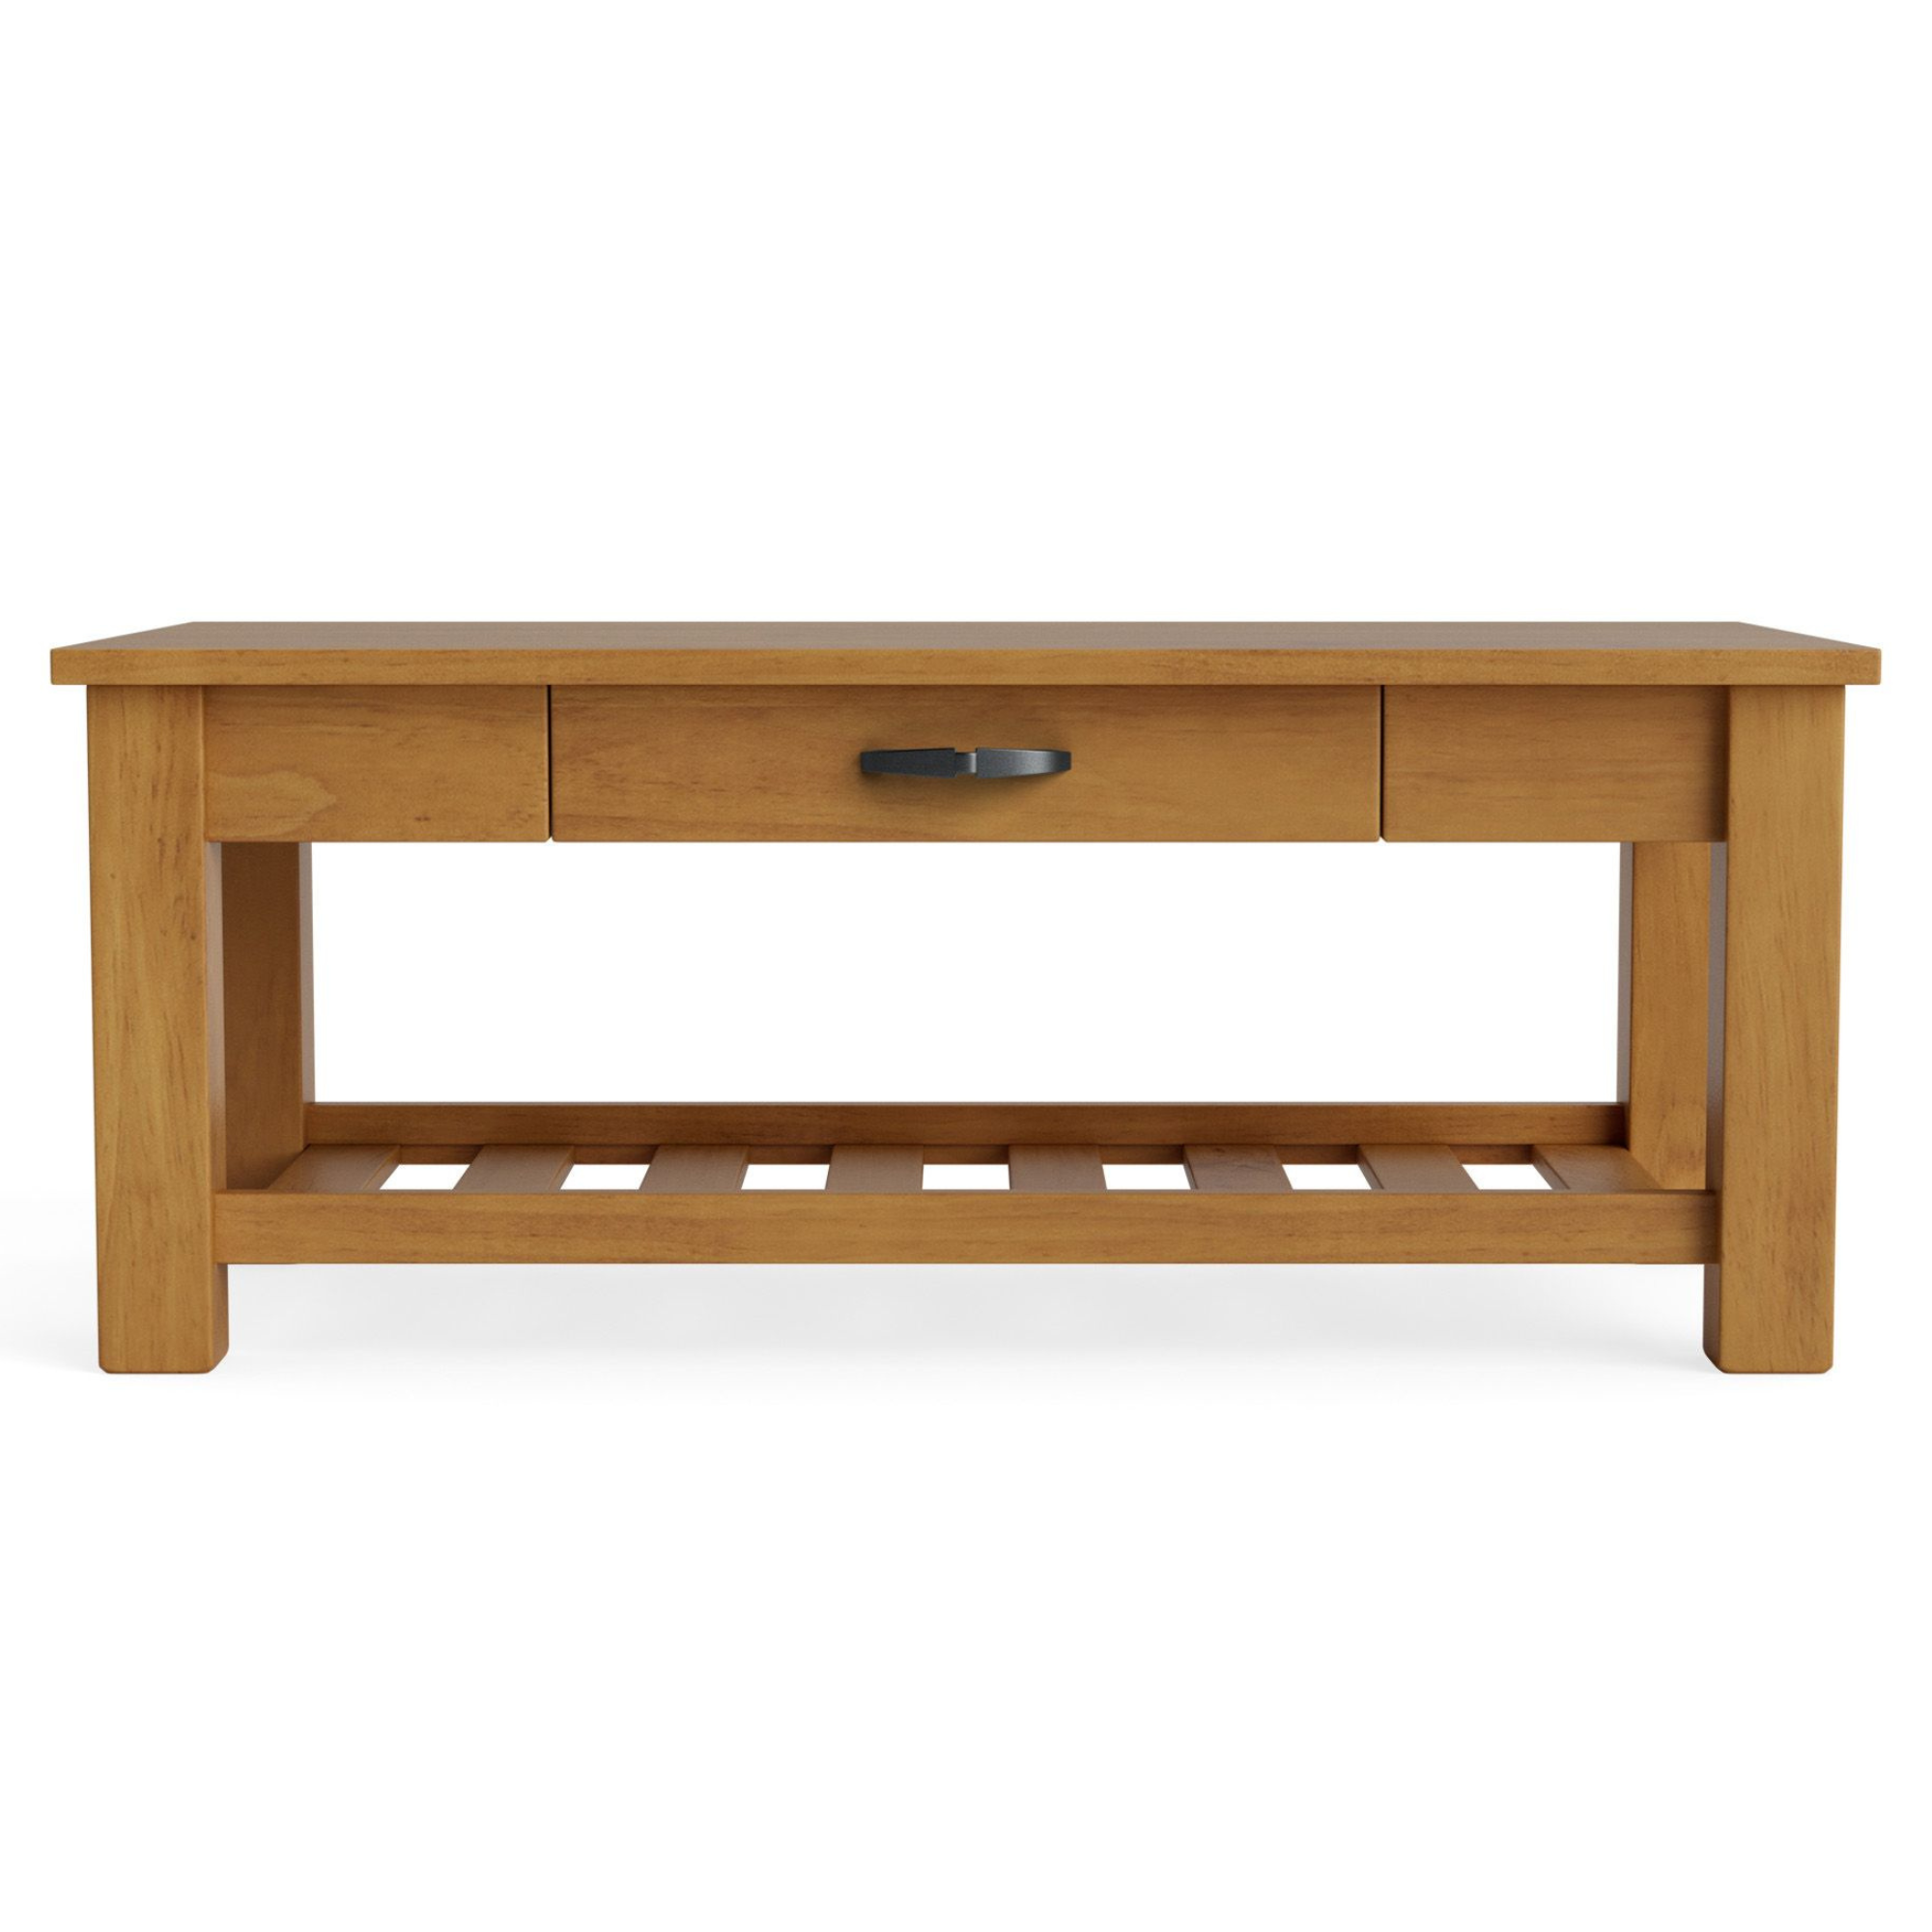 CHARLTON COFFEE TABLE WITH RACK AND DRAWER | NZ MADE